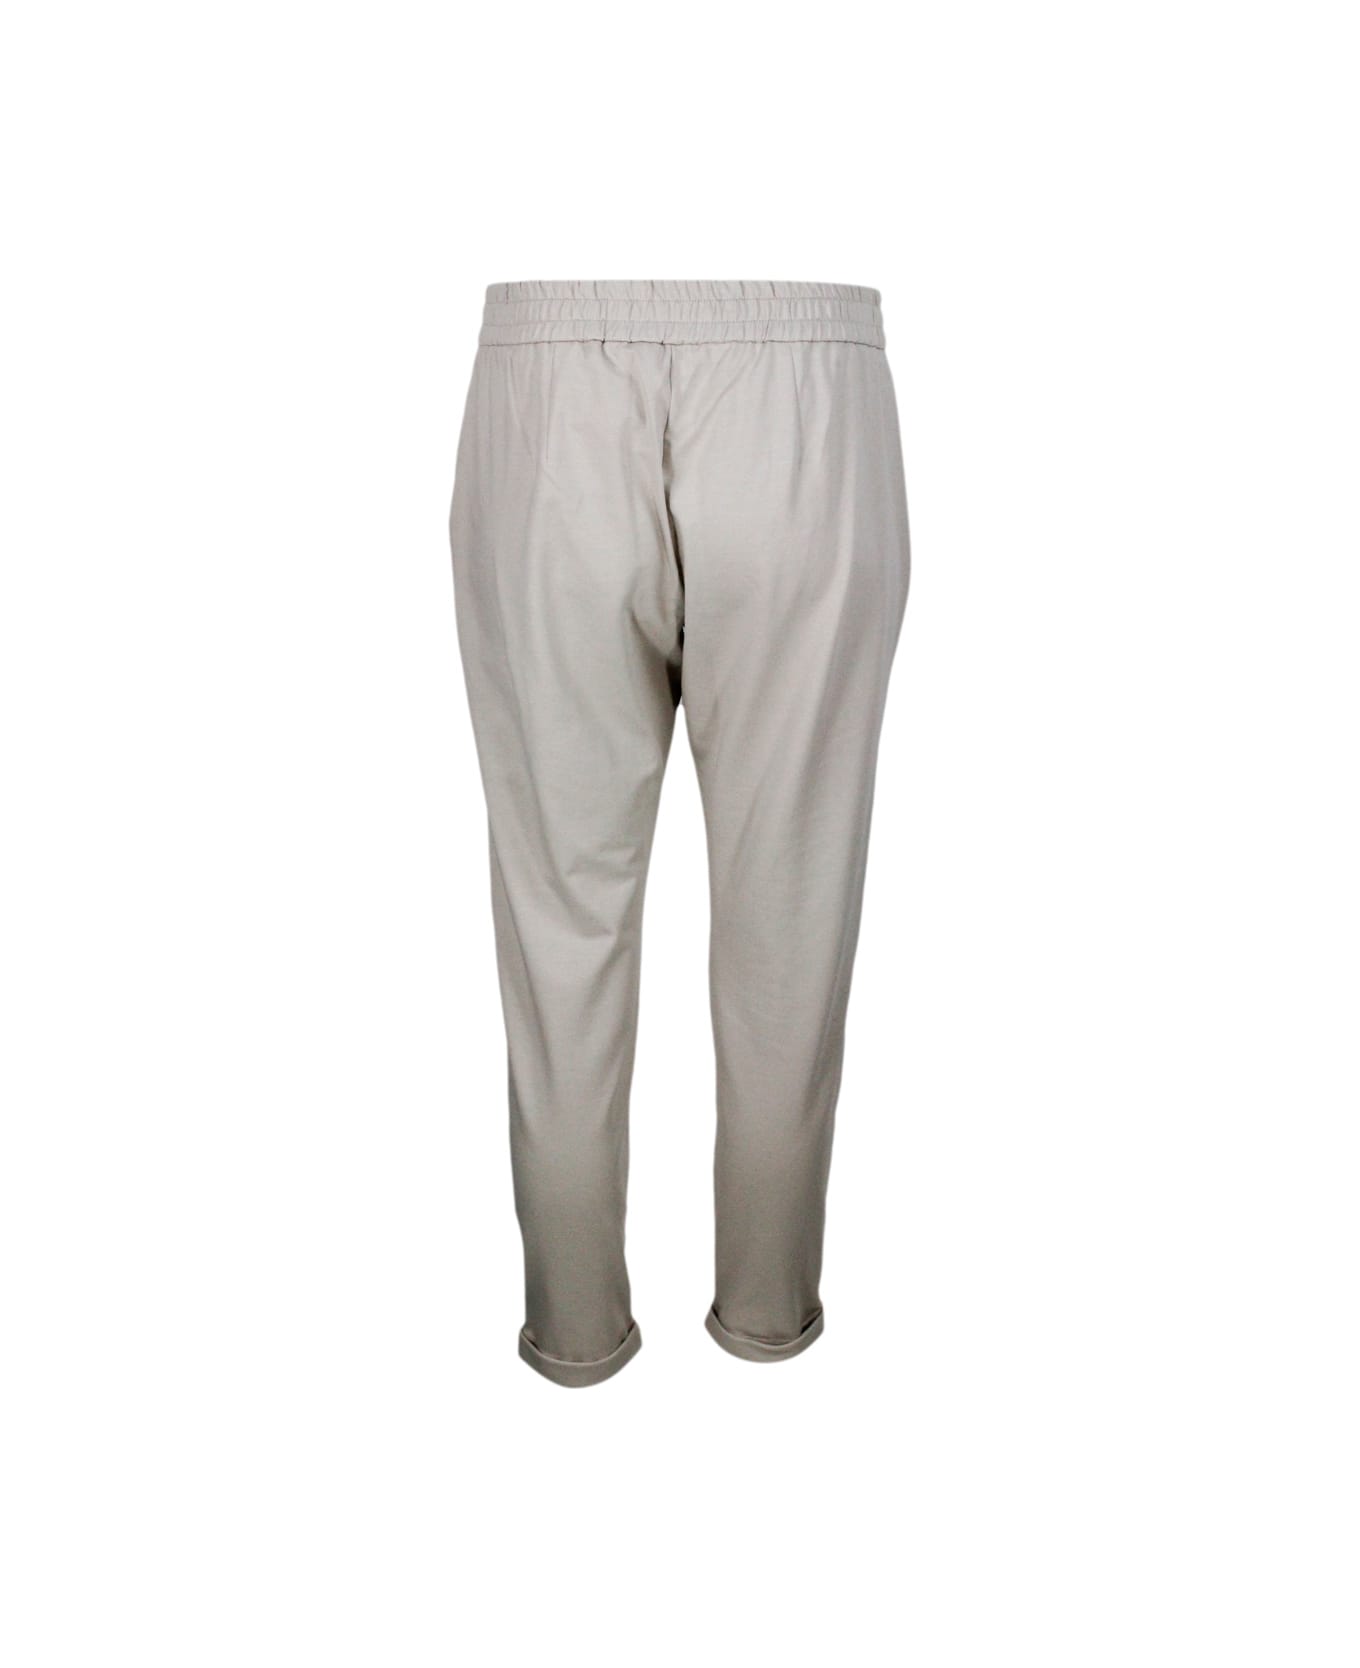 Brunello Cucinelli Jogging Trousers With Drawstring Waist In Stretch Cotton With Welt Pockets Embellished With Jewels - Beige